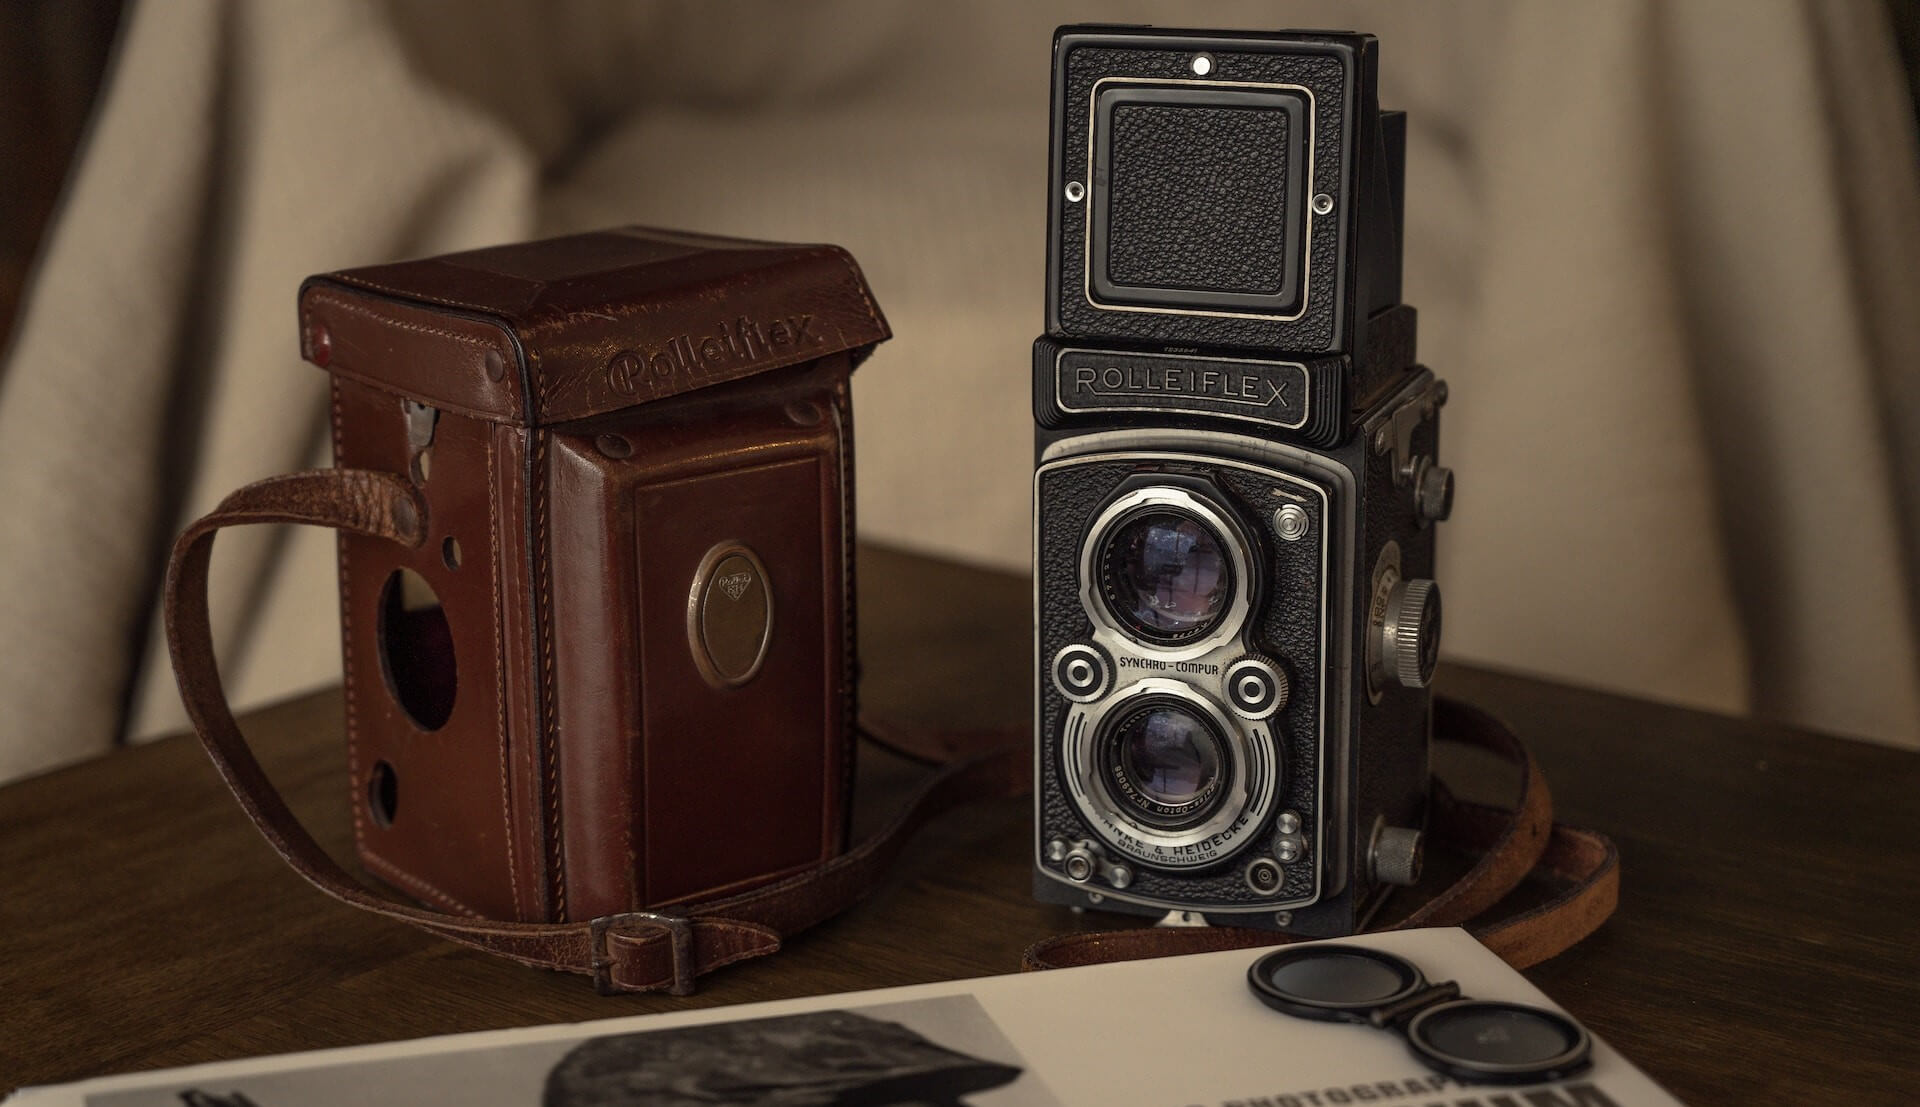 Vintage Rolleiflex twin lens camera with a protective leather case.